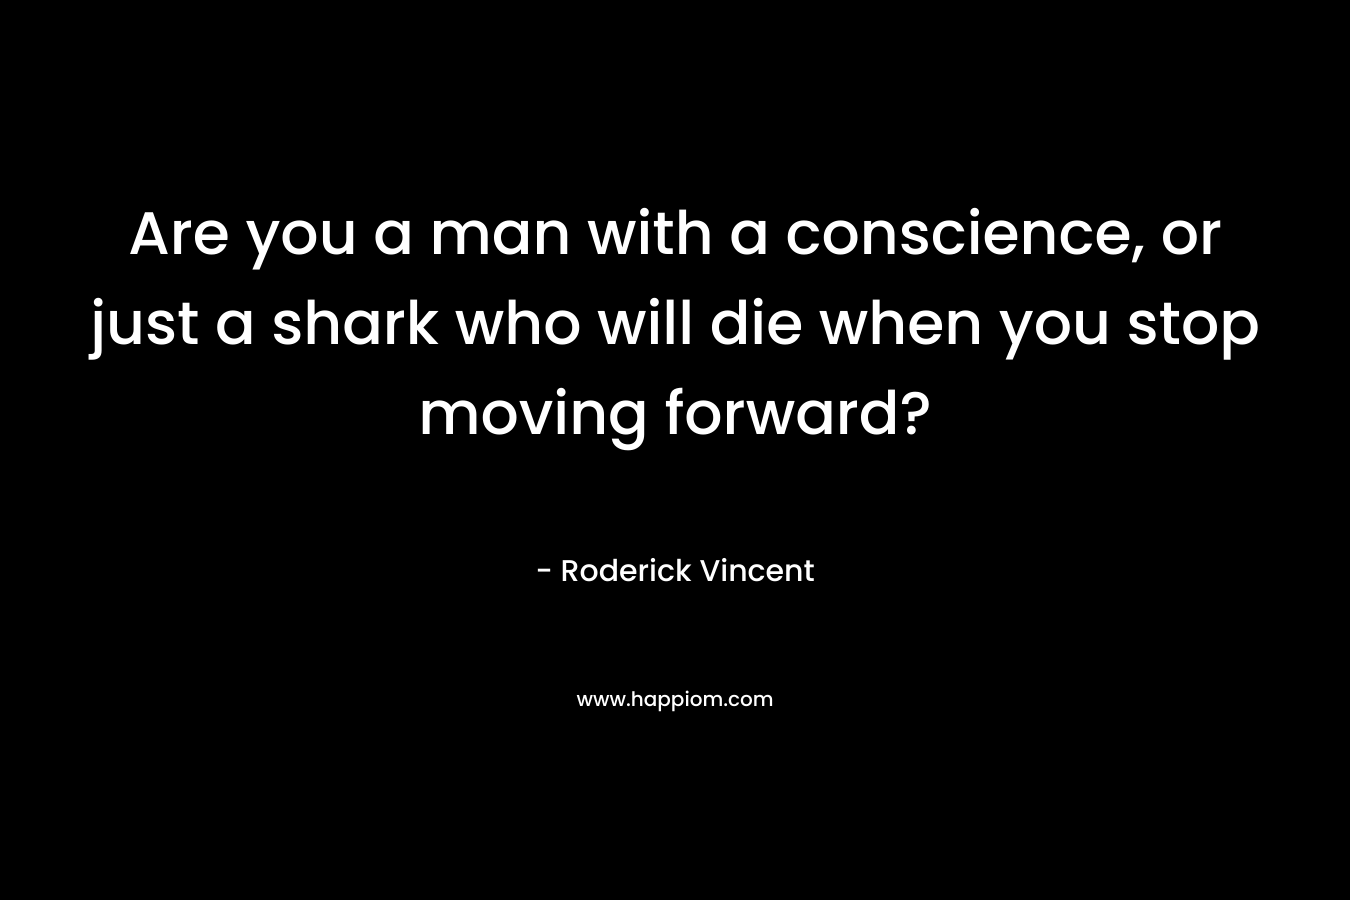 Are you a man with a conscience, or just a shark who will die when you stop moving forward?